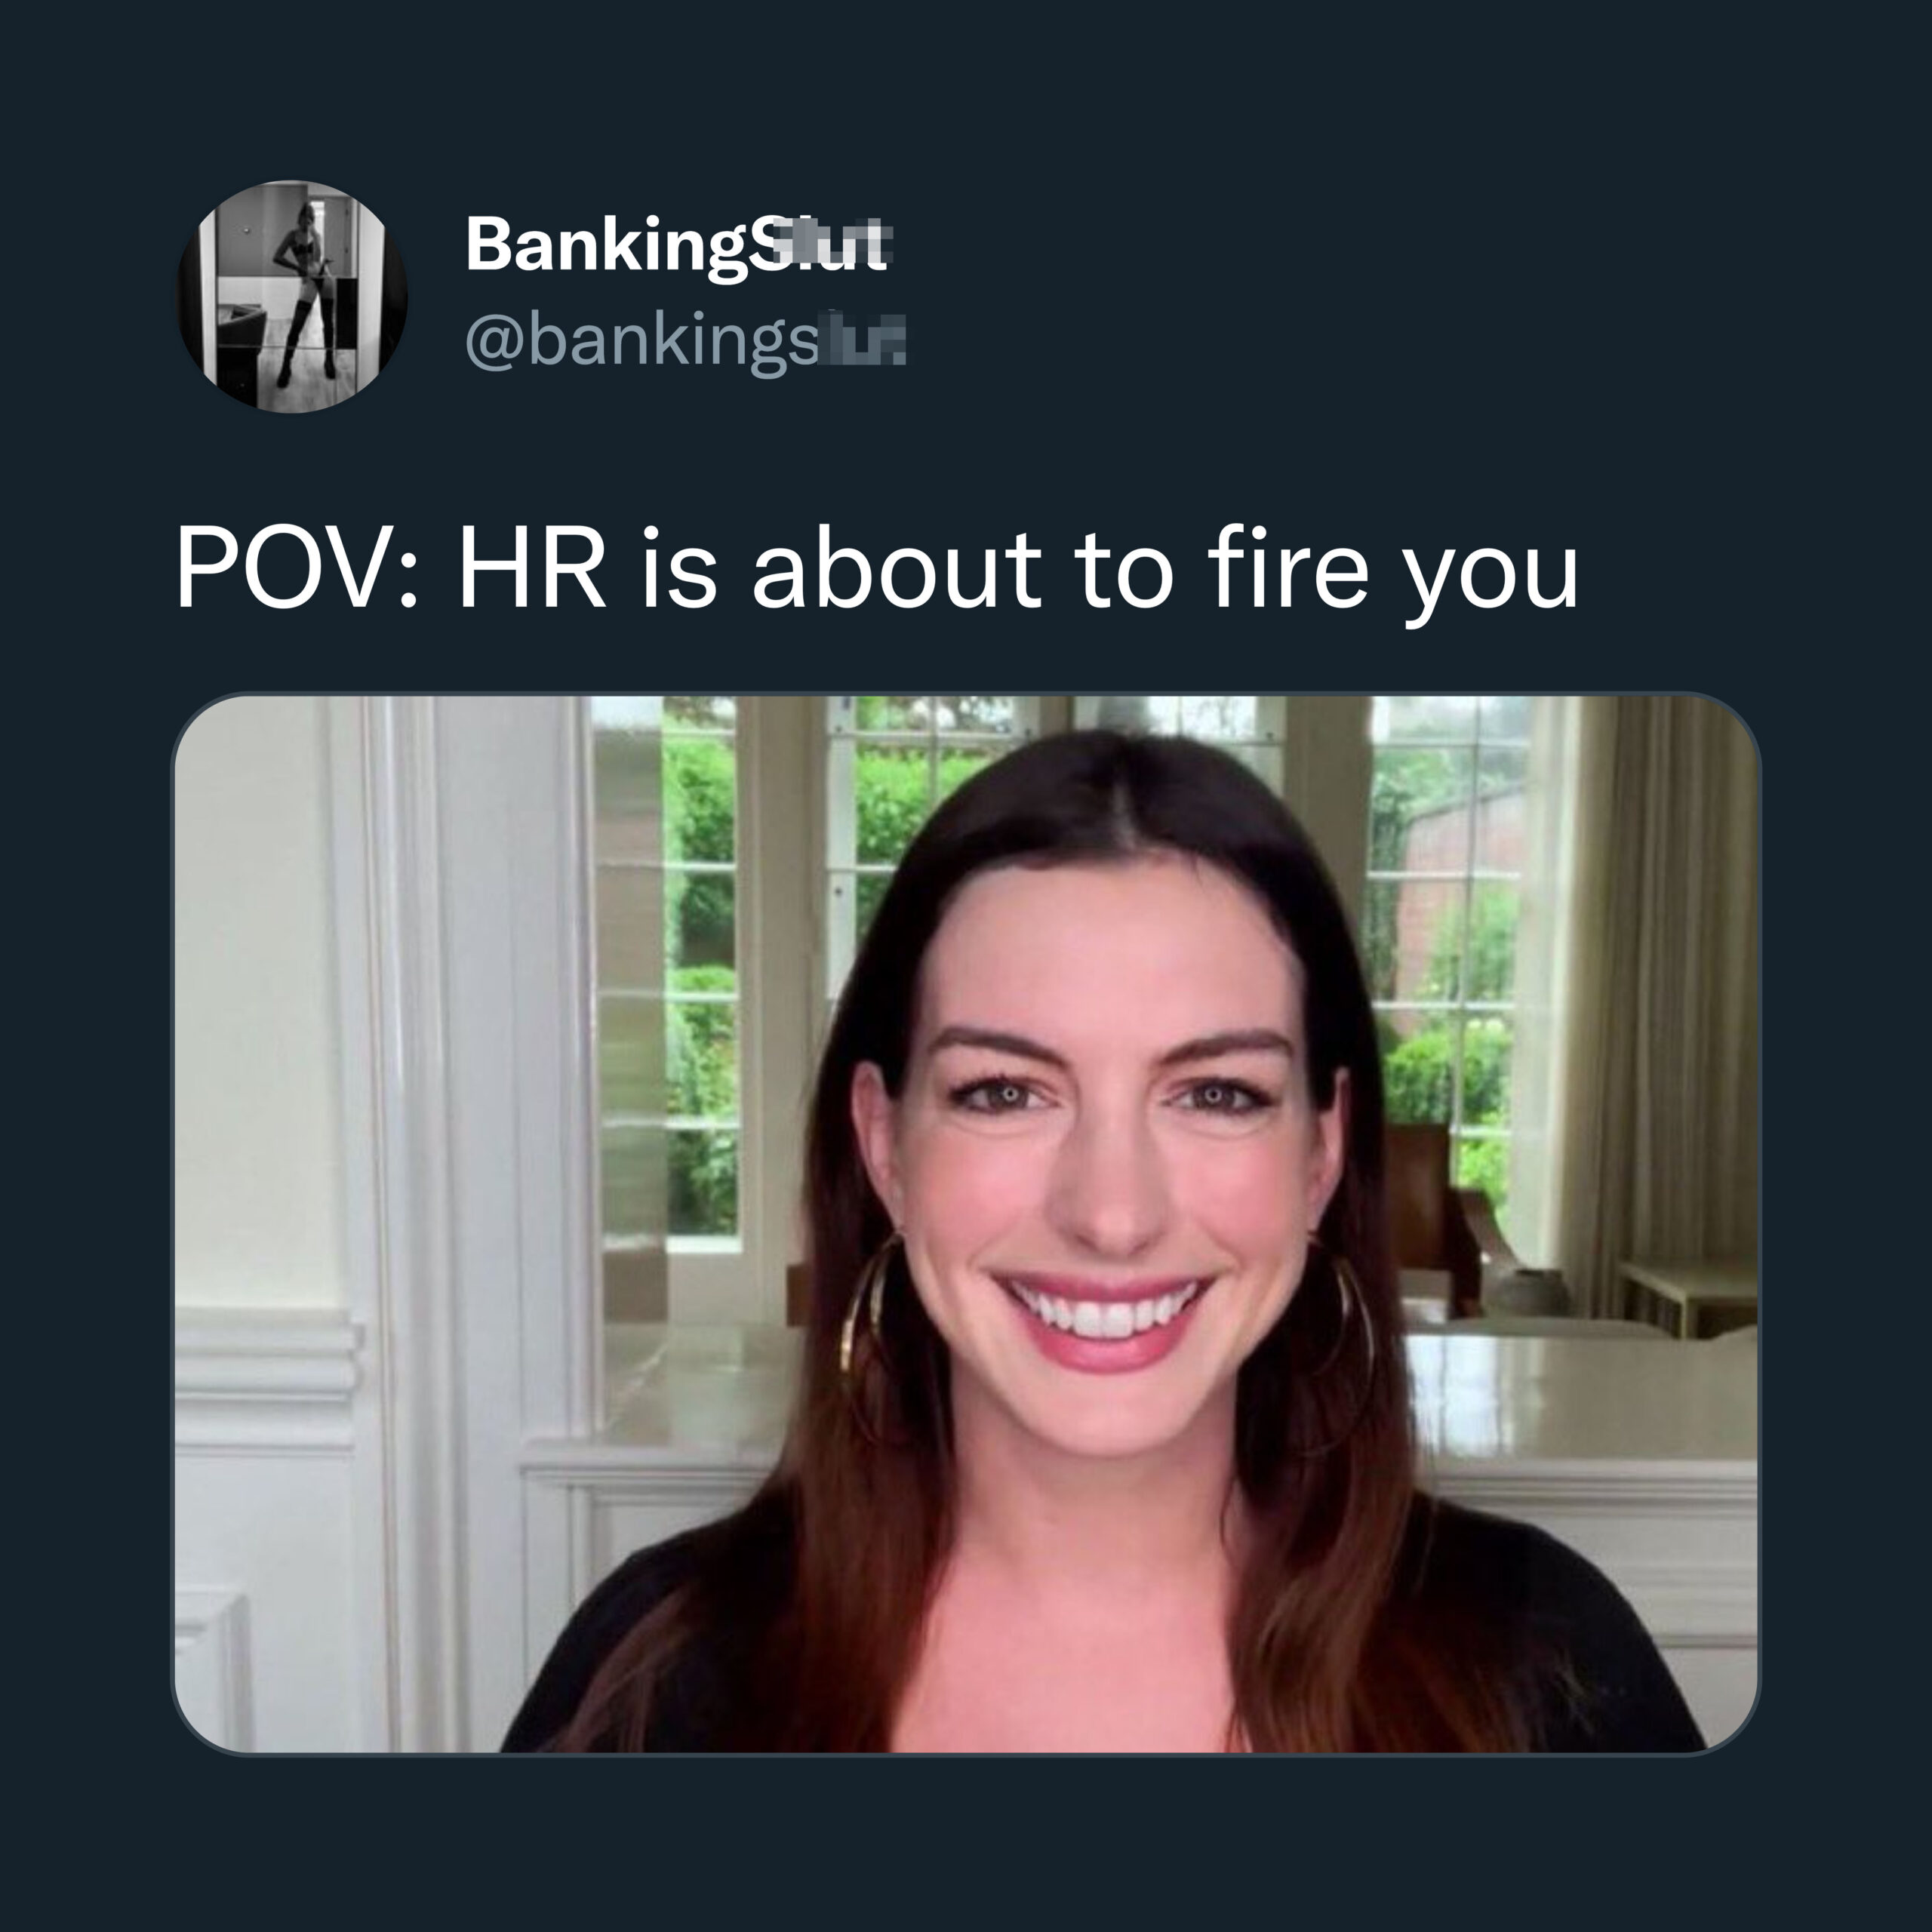 POV HR is about to fire you - anne hathwaway meme